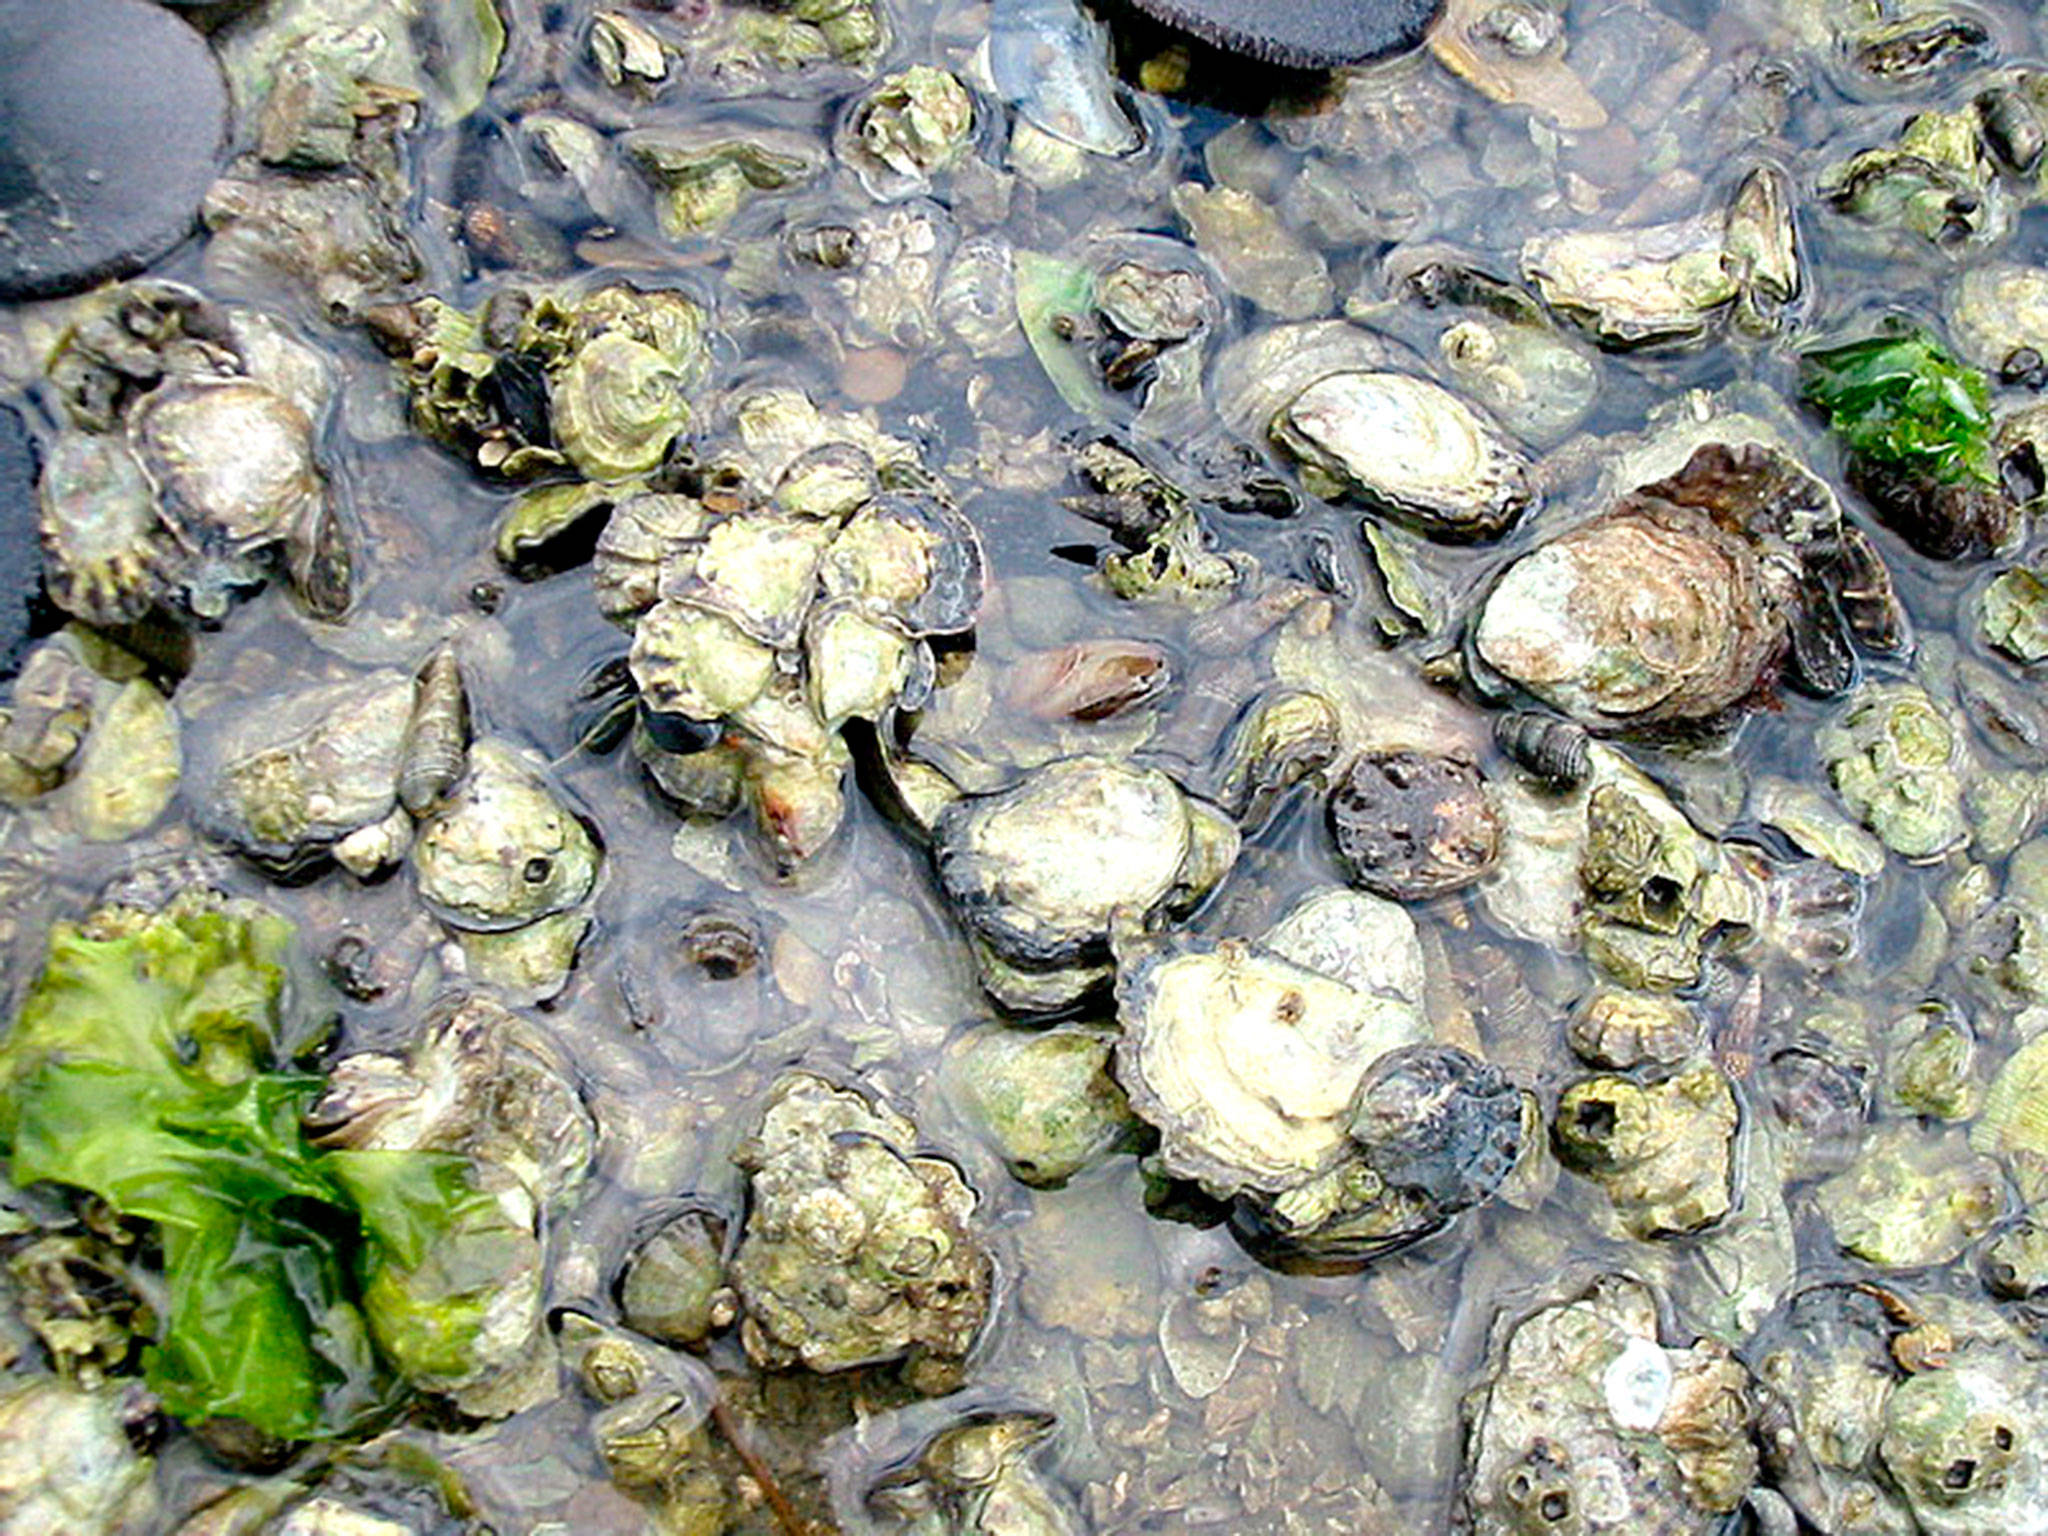 Oyster season is open or will be open April 1 through many nearby beaches. (NOAA photo)